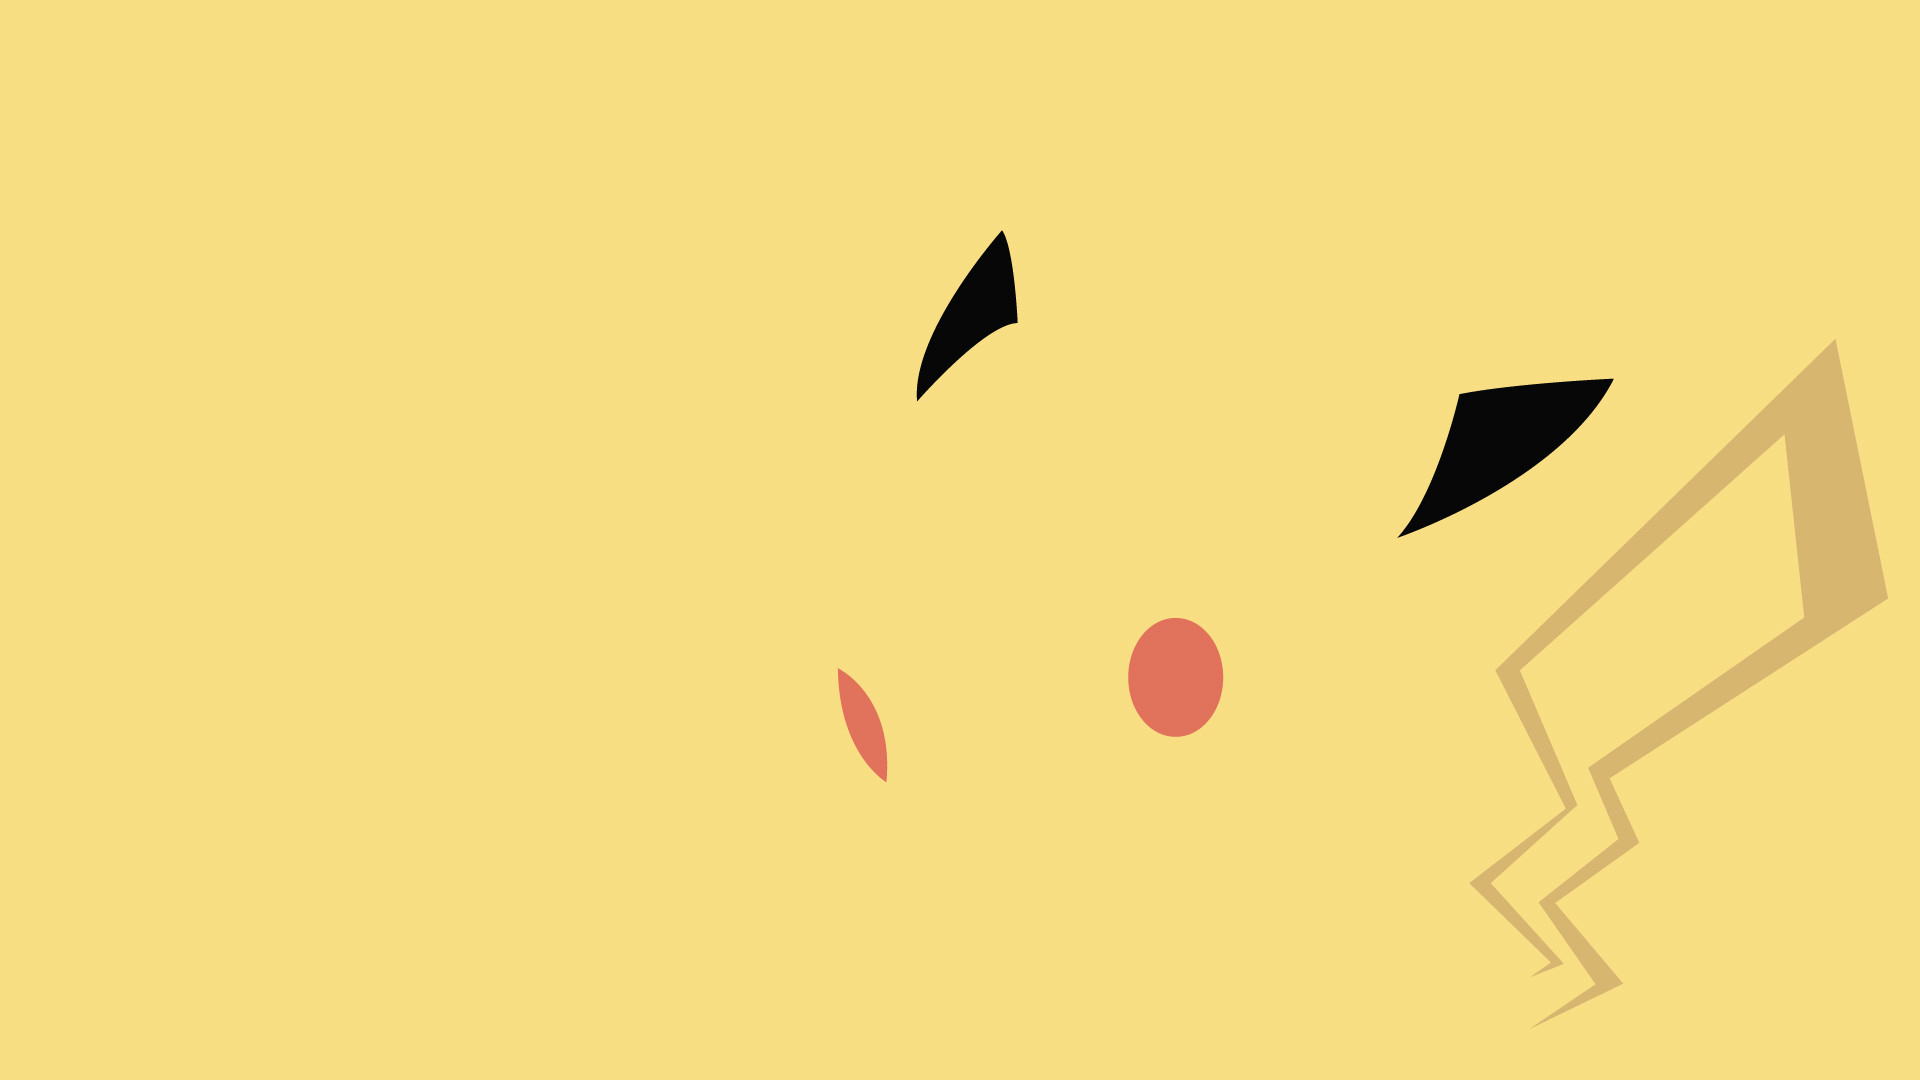 1920x1080 Awesome minimalist Pikachu wallpaper. There is a whole collection of them  at the linked site